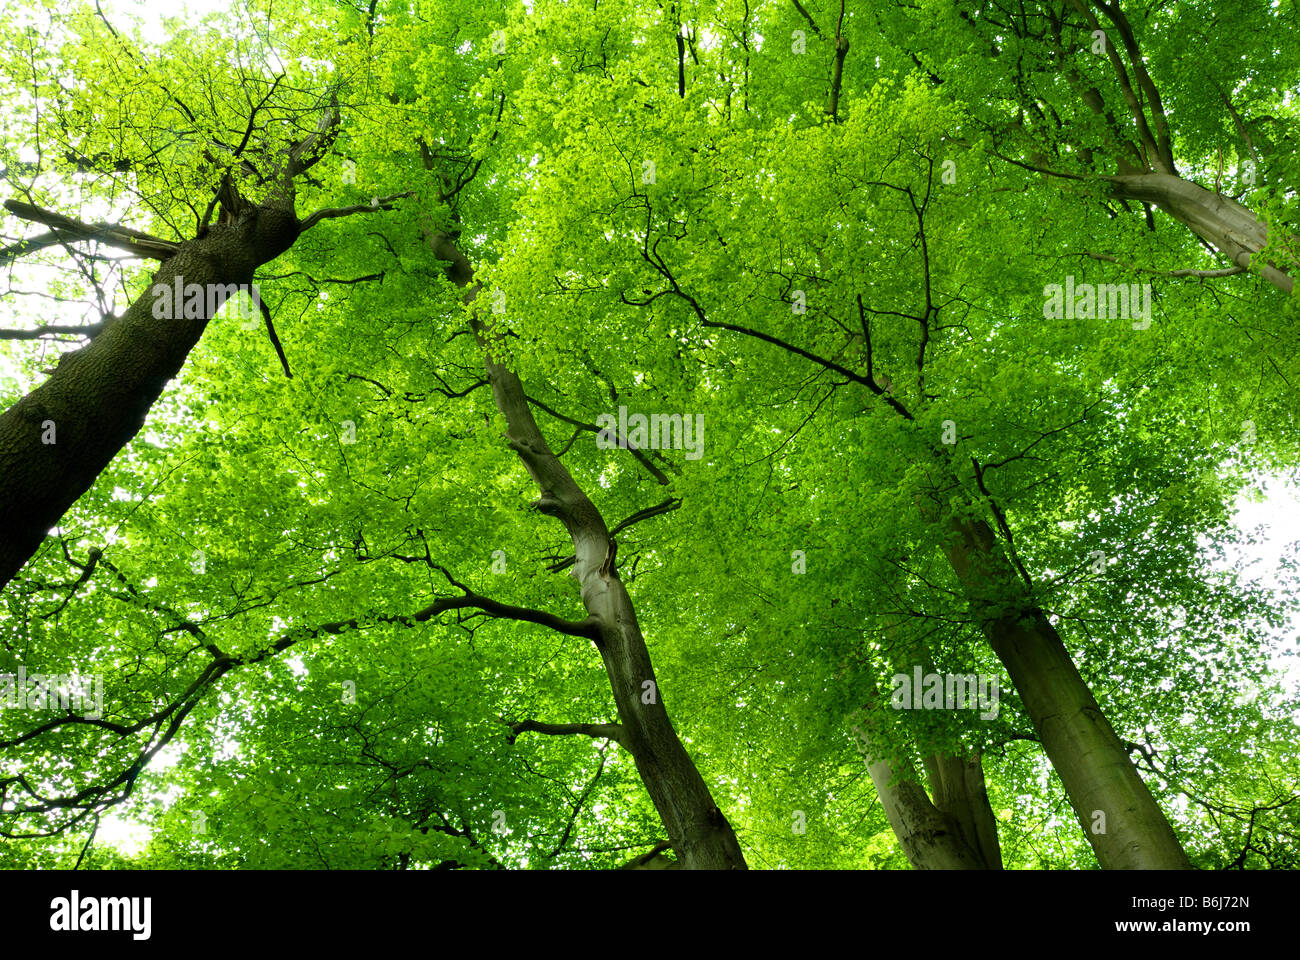 Four Giant beech trees in cheshire wood, england Stock Photo